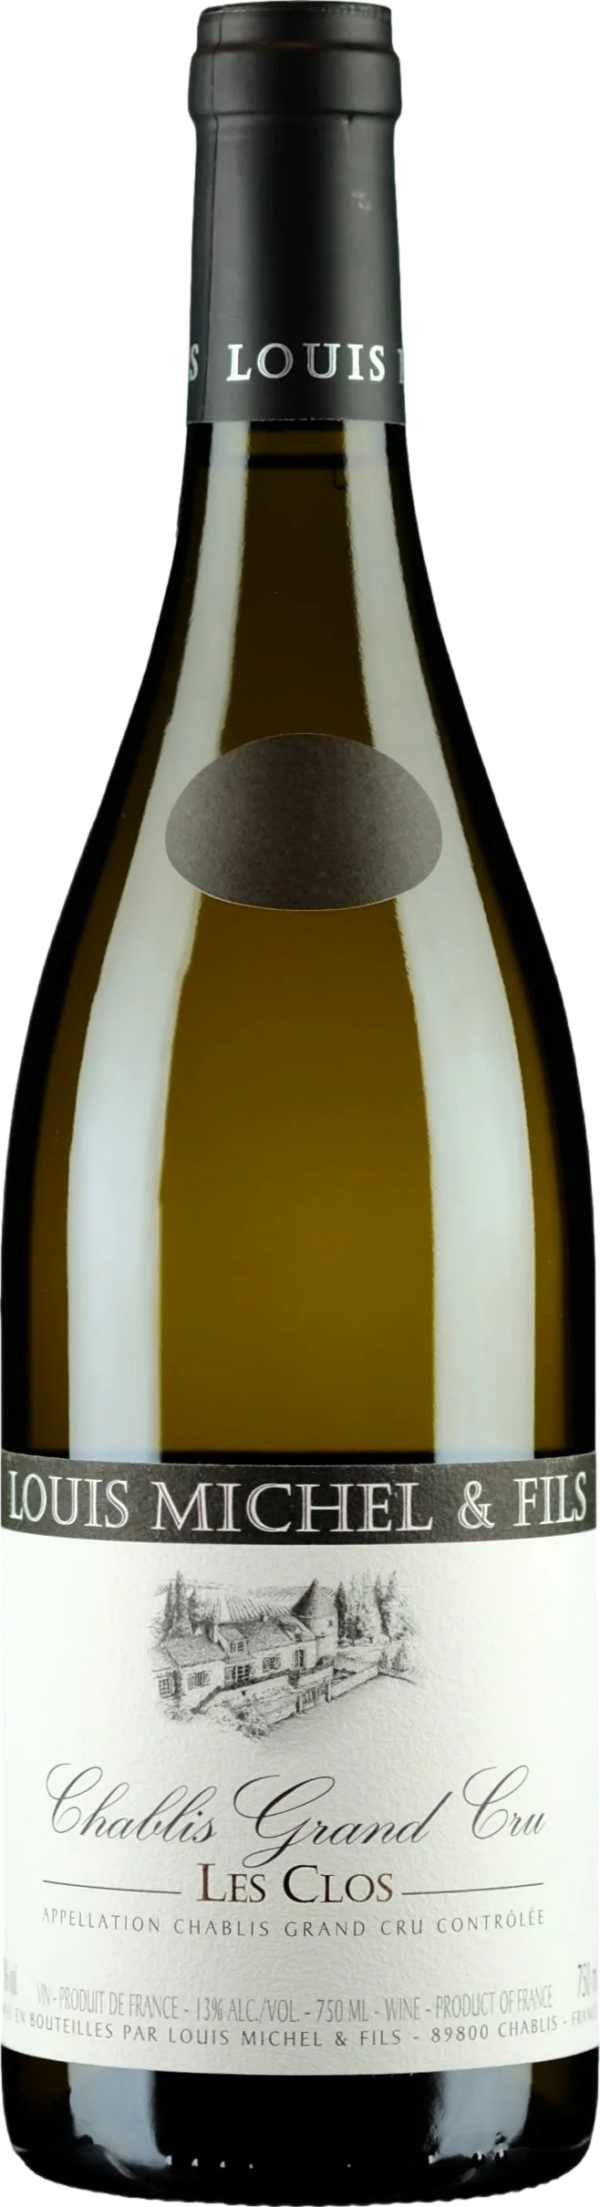 Product image of Louis Michel & Fils Chablis Grand Cru Les Clos 2021 from 8wines